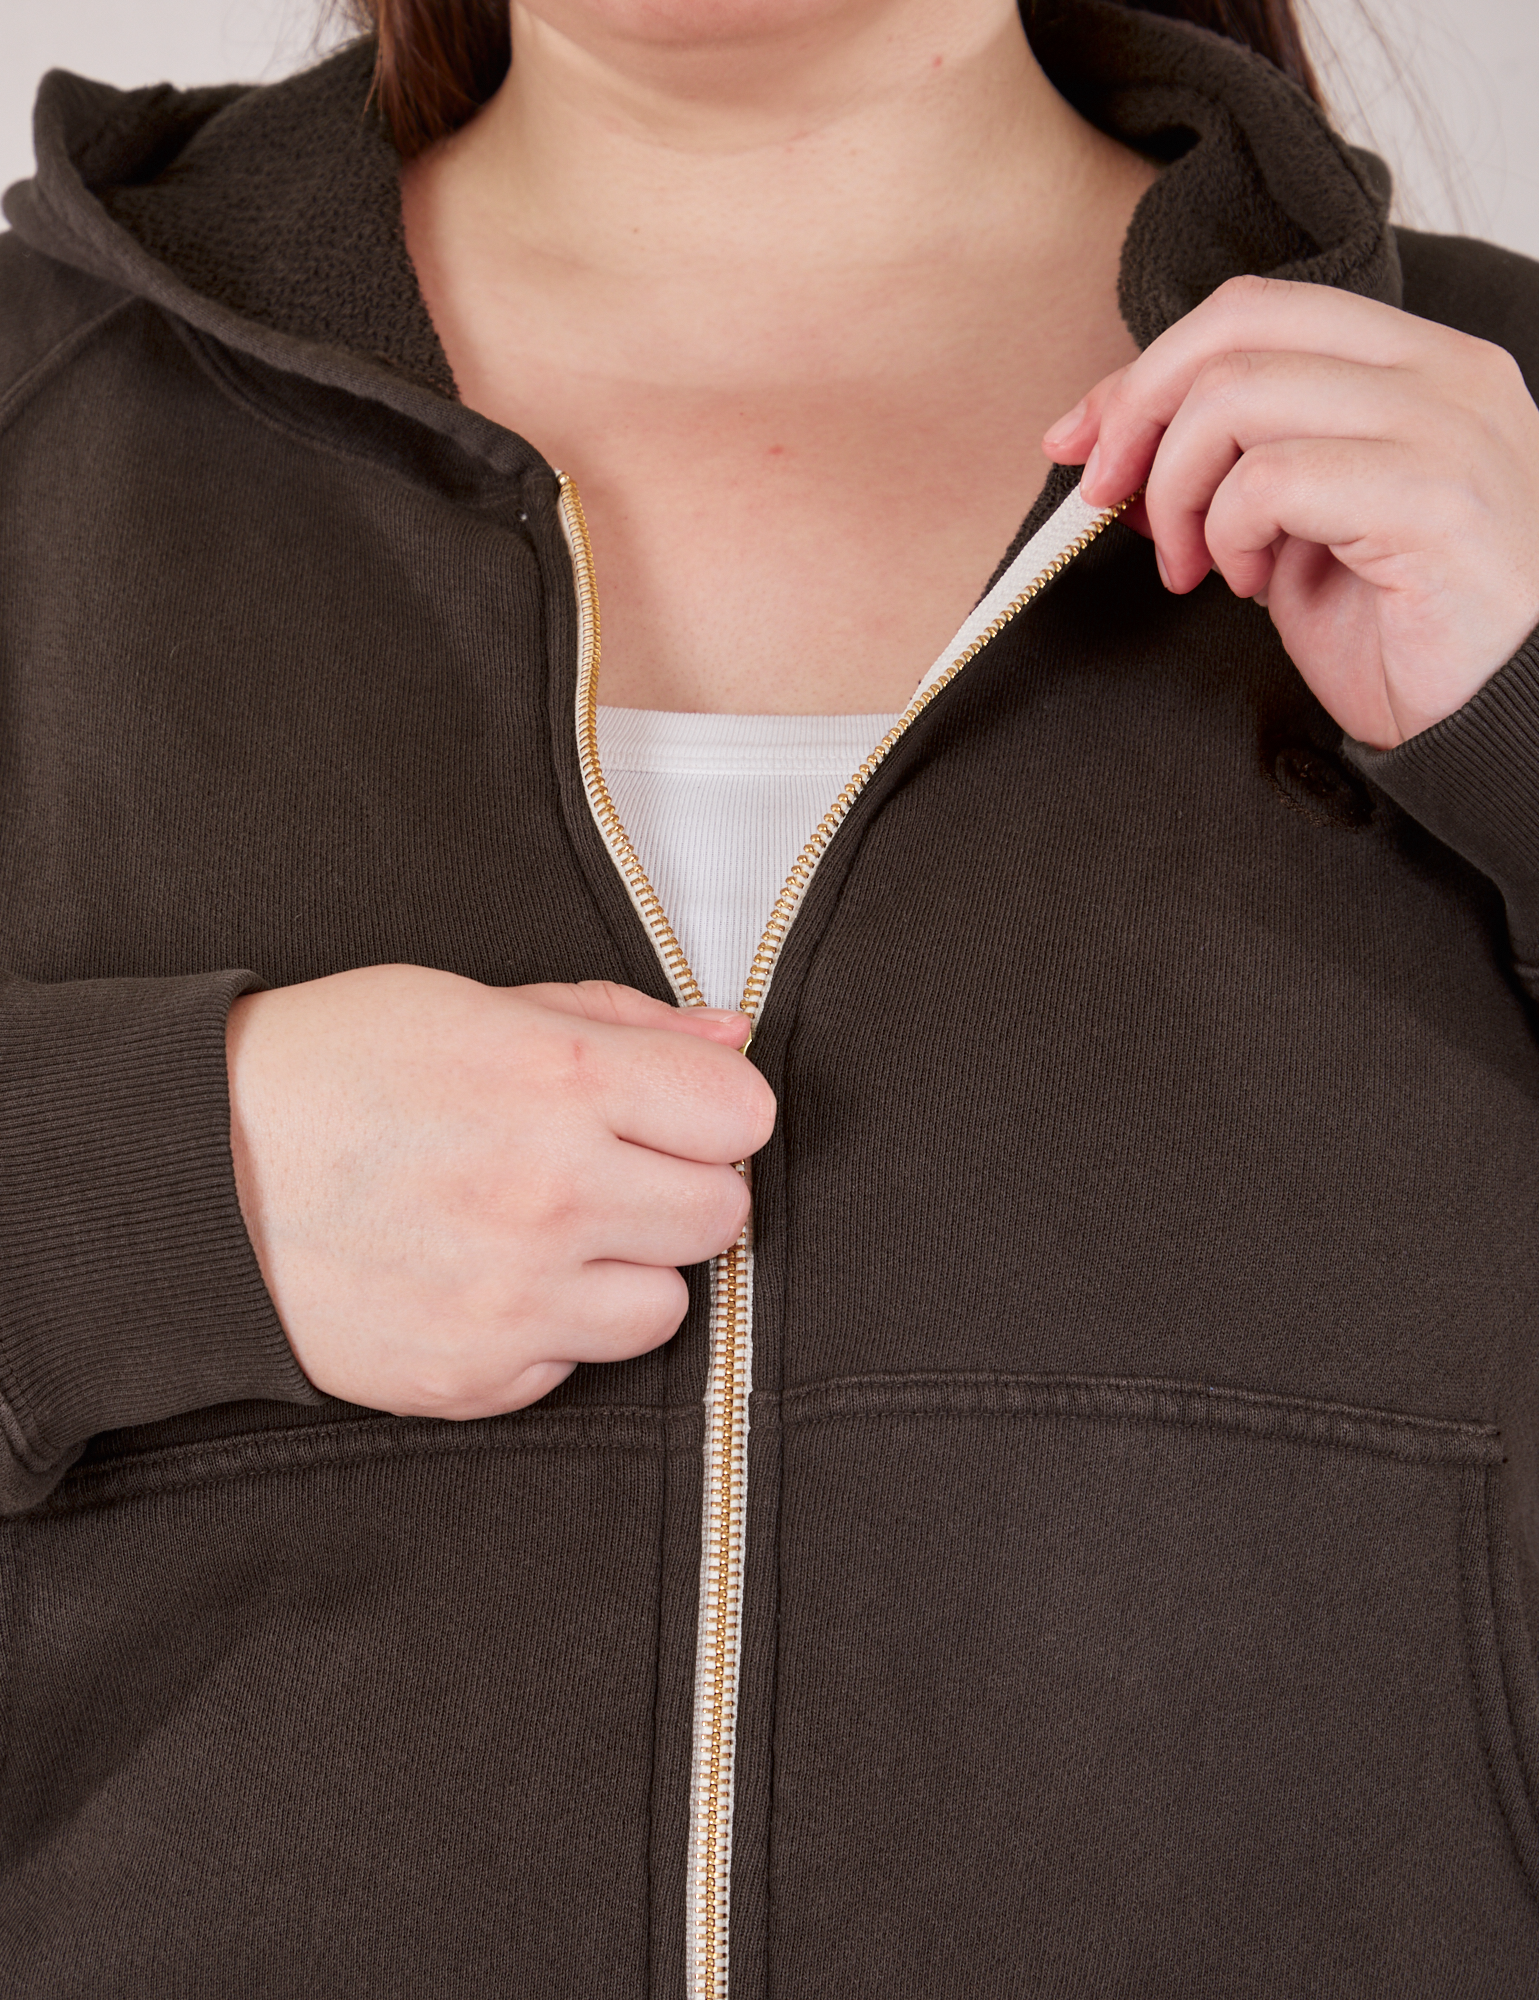 Cropped Zip Hoodie in Espresso Brown front close up. Marielena is pulling on the zipper tab.